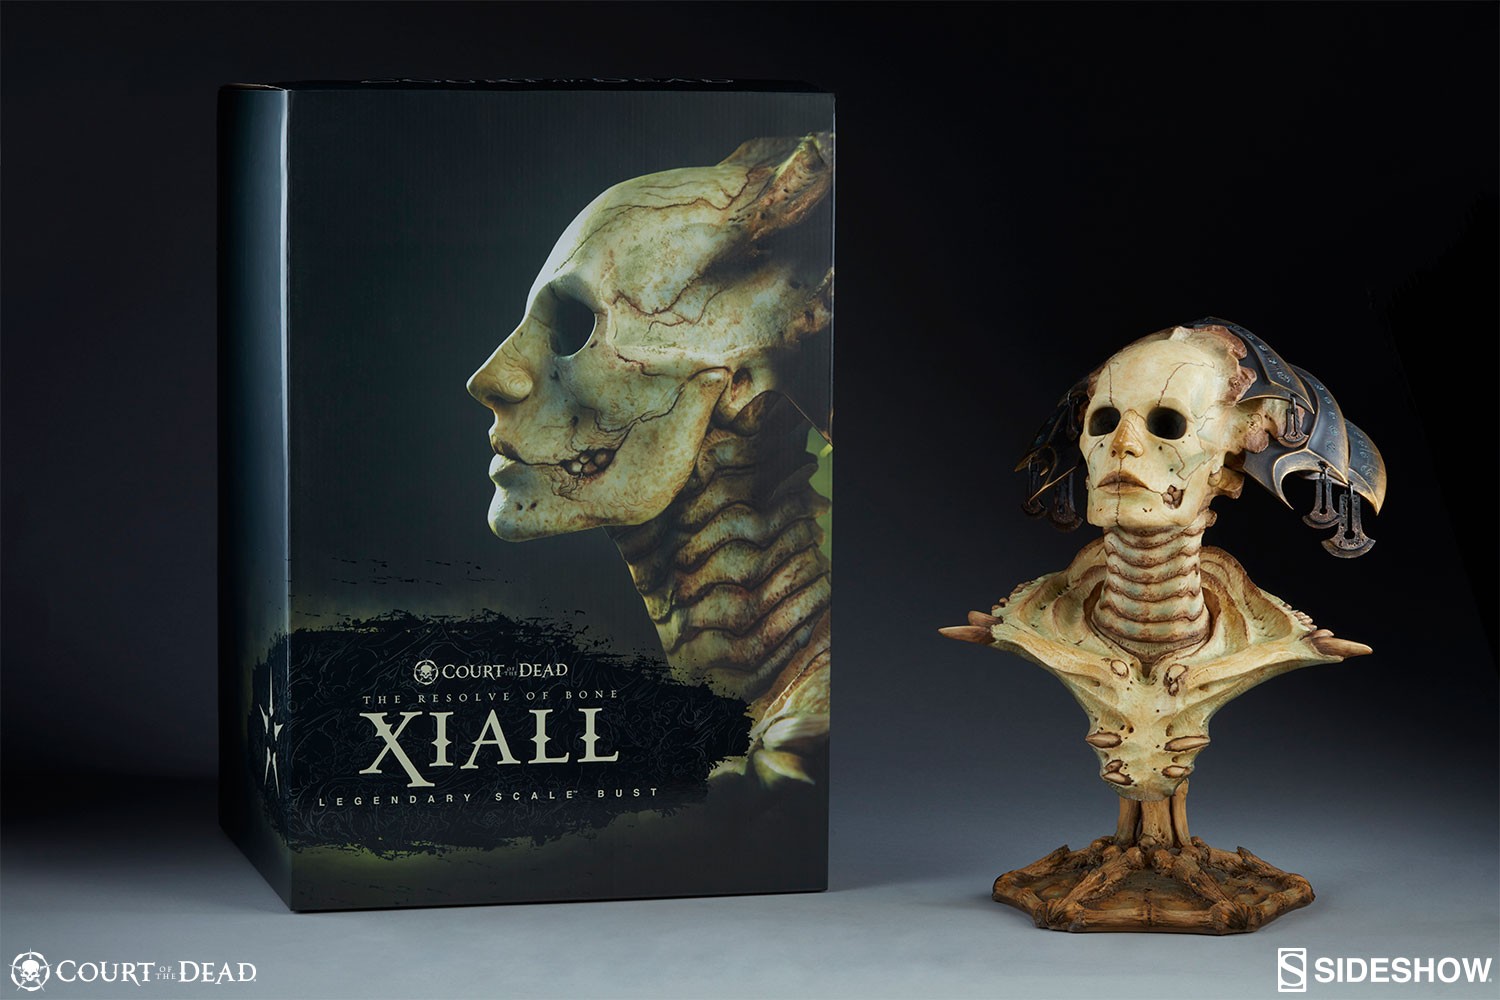 Xiall The Resolve of Bone